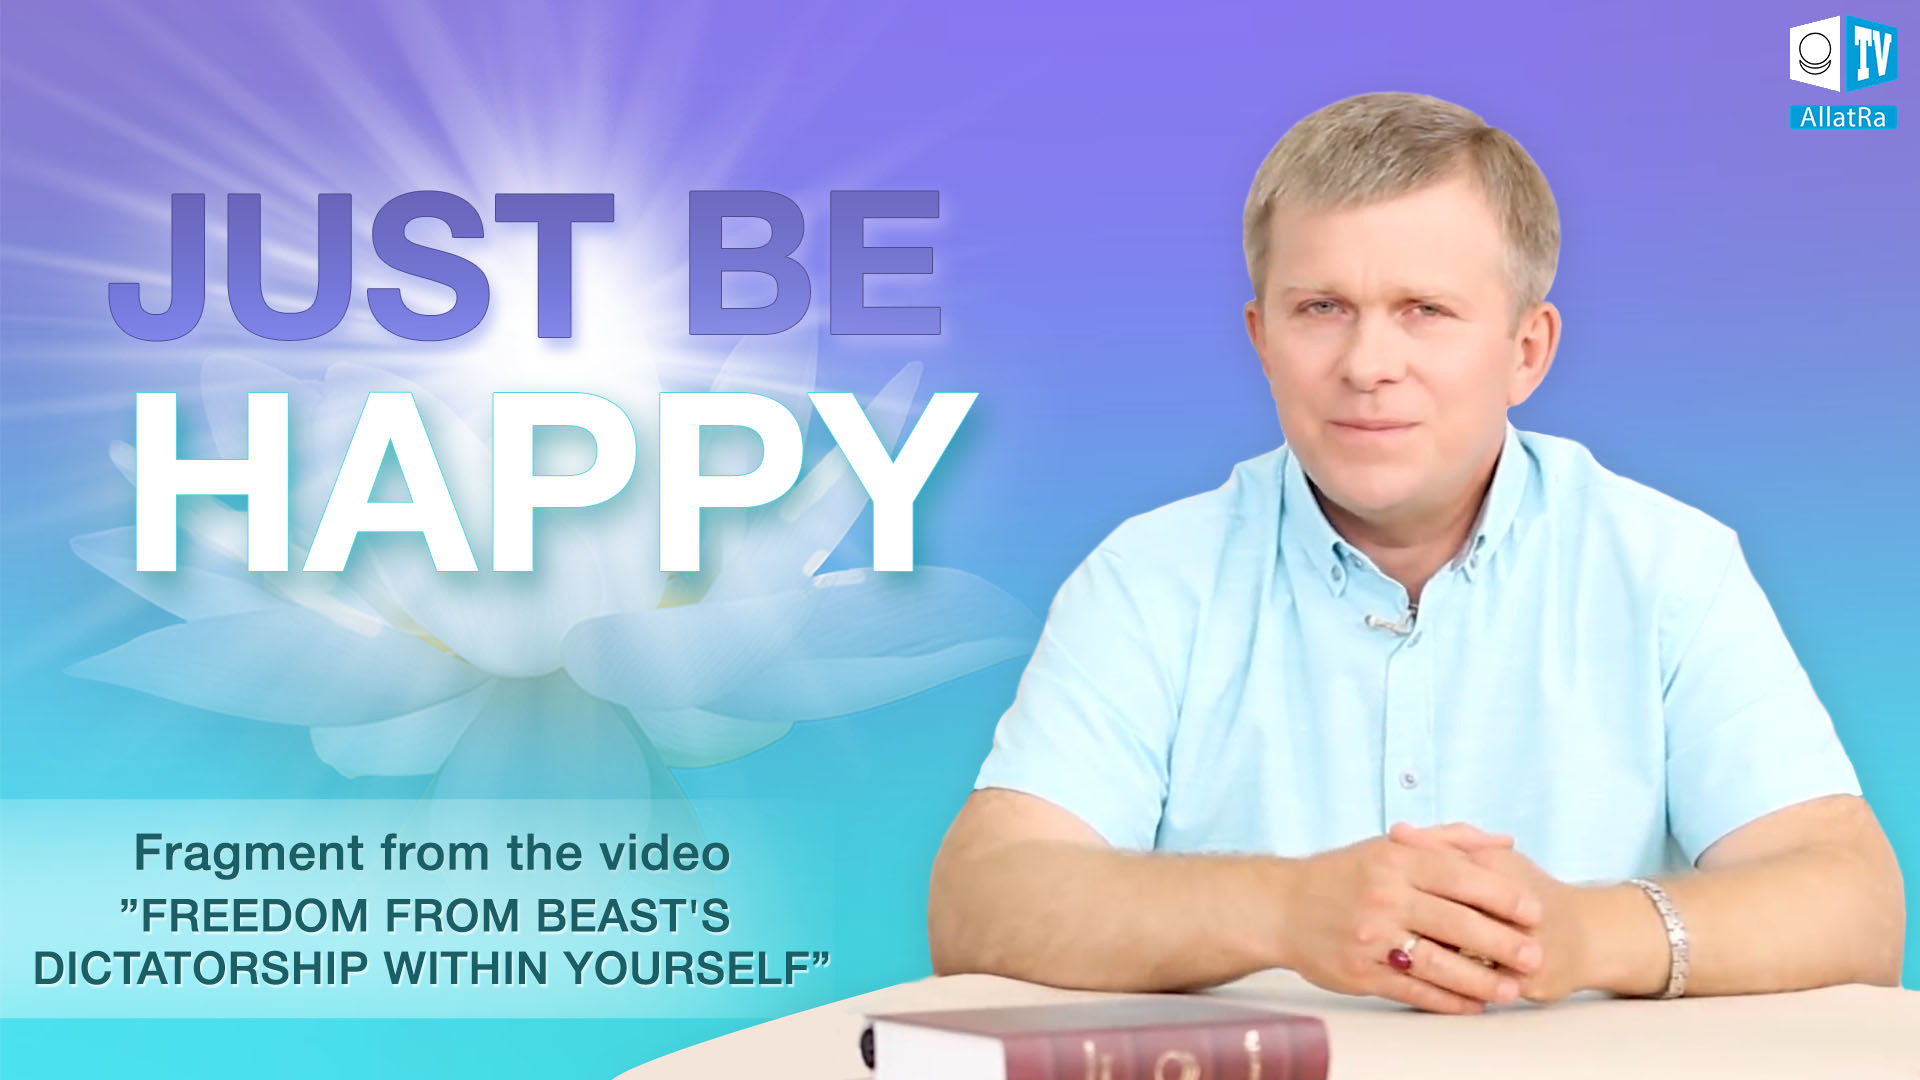 Happiness begins now - Just practice this easy tip